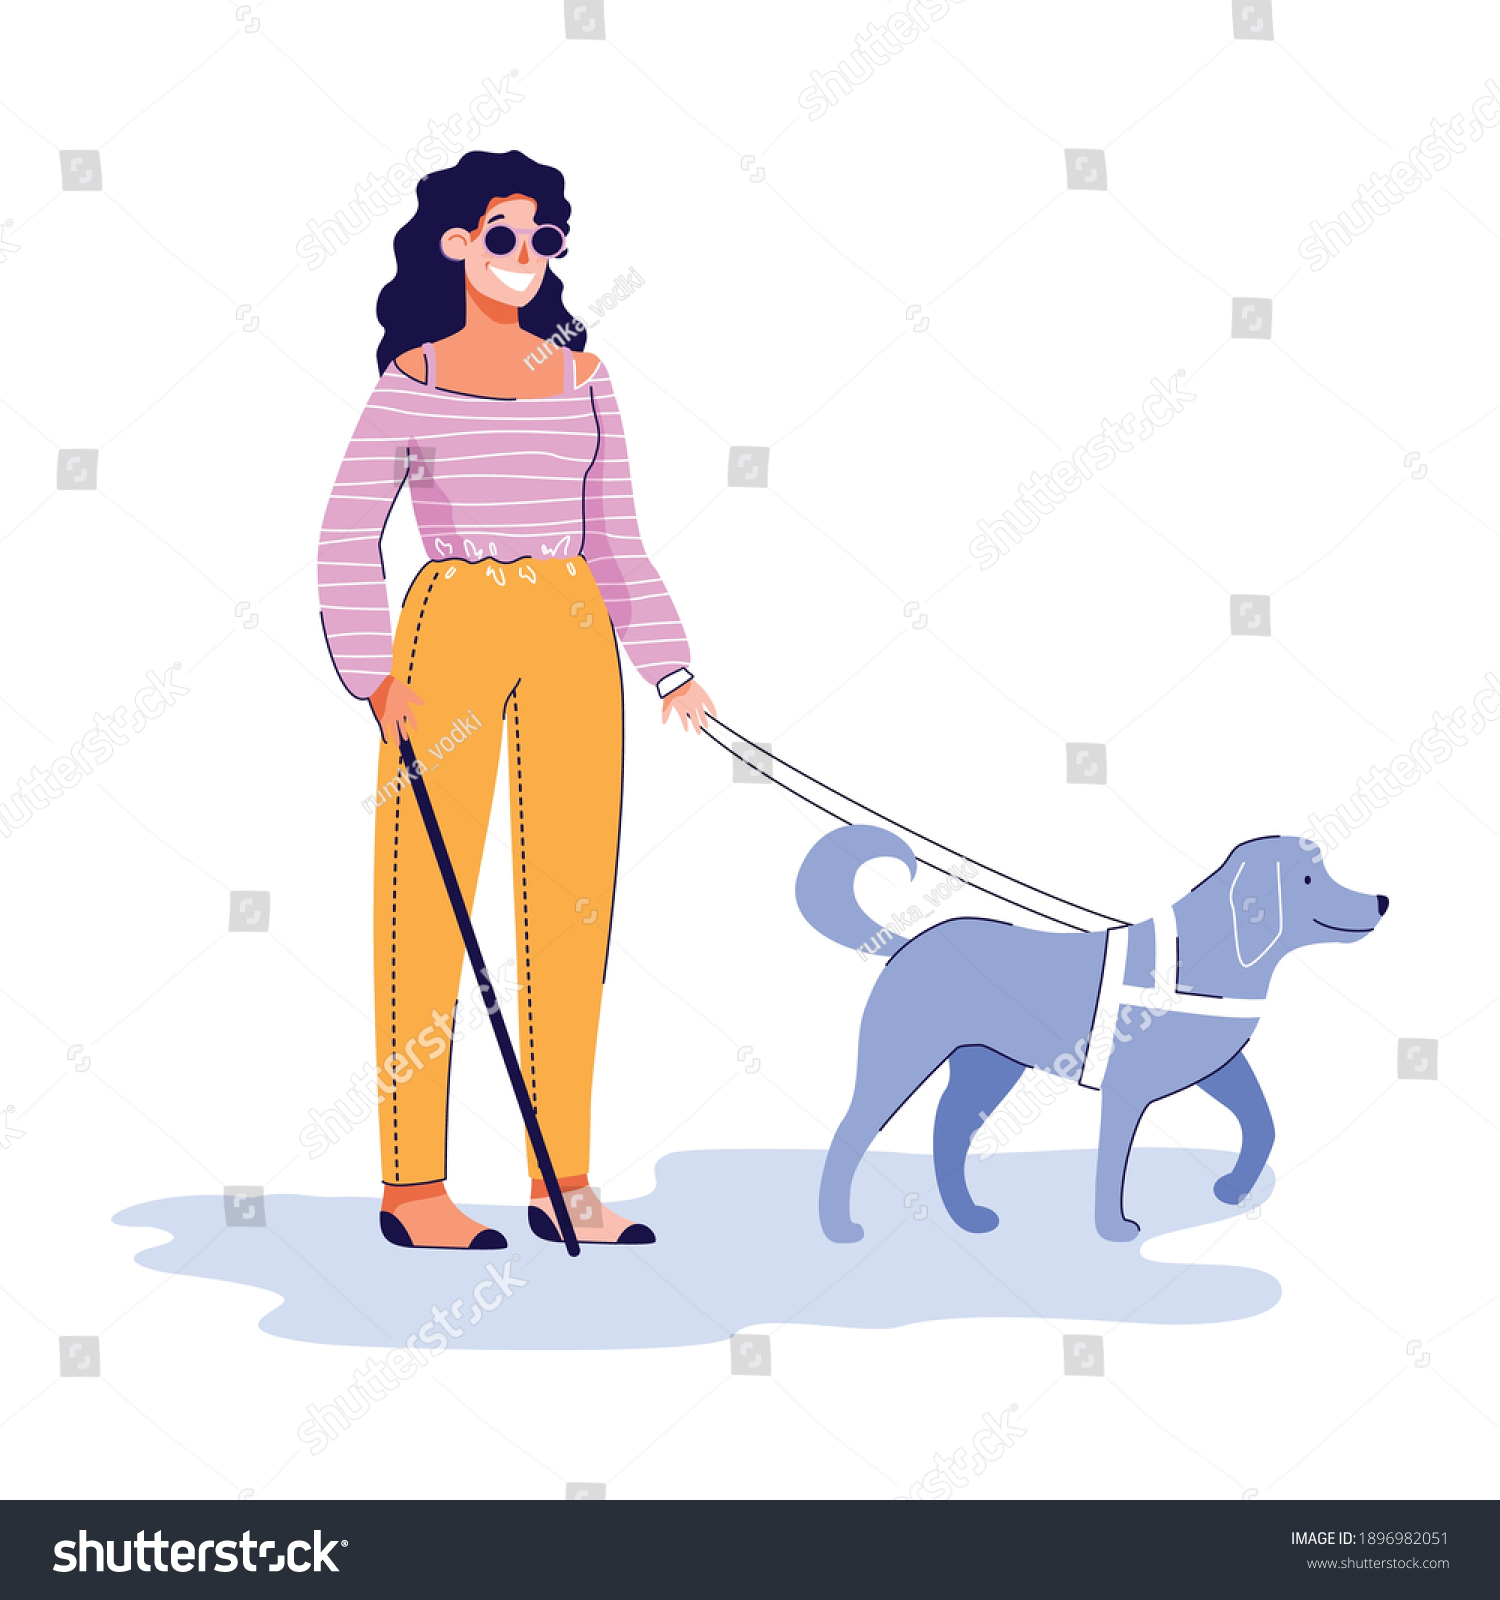 SVG of Cartoon blind woman walking with guide dog and cane - person with vision loss disability smiling and strolling with service animal. Flat isolated vector illustration. svg